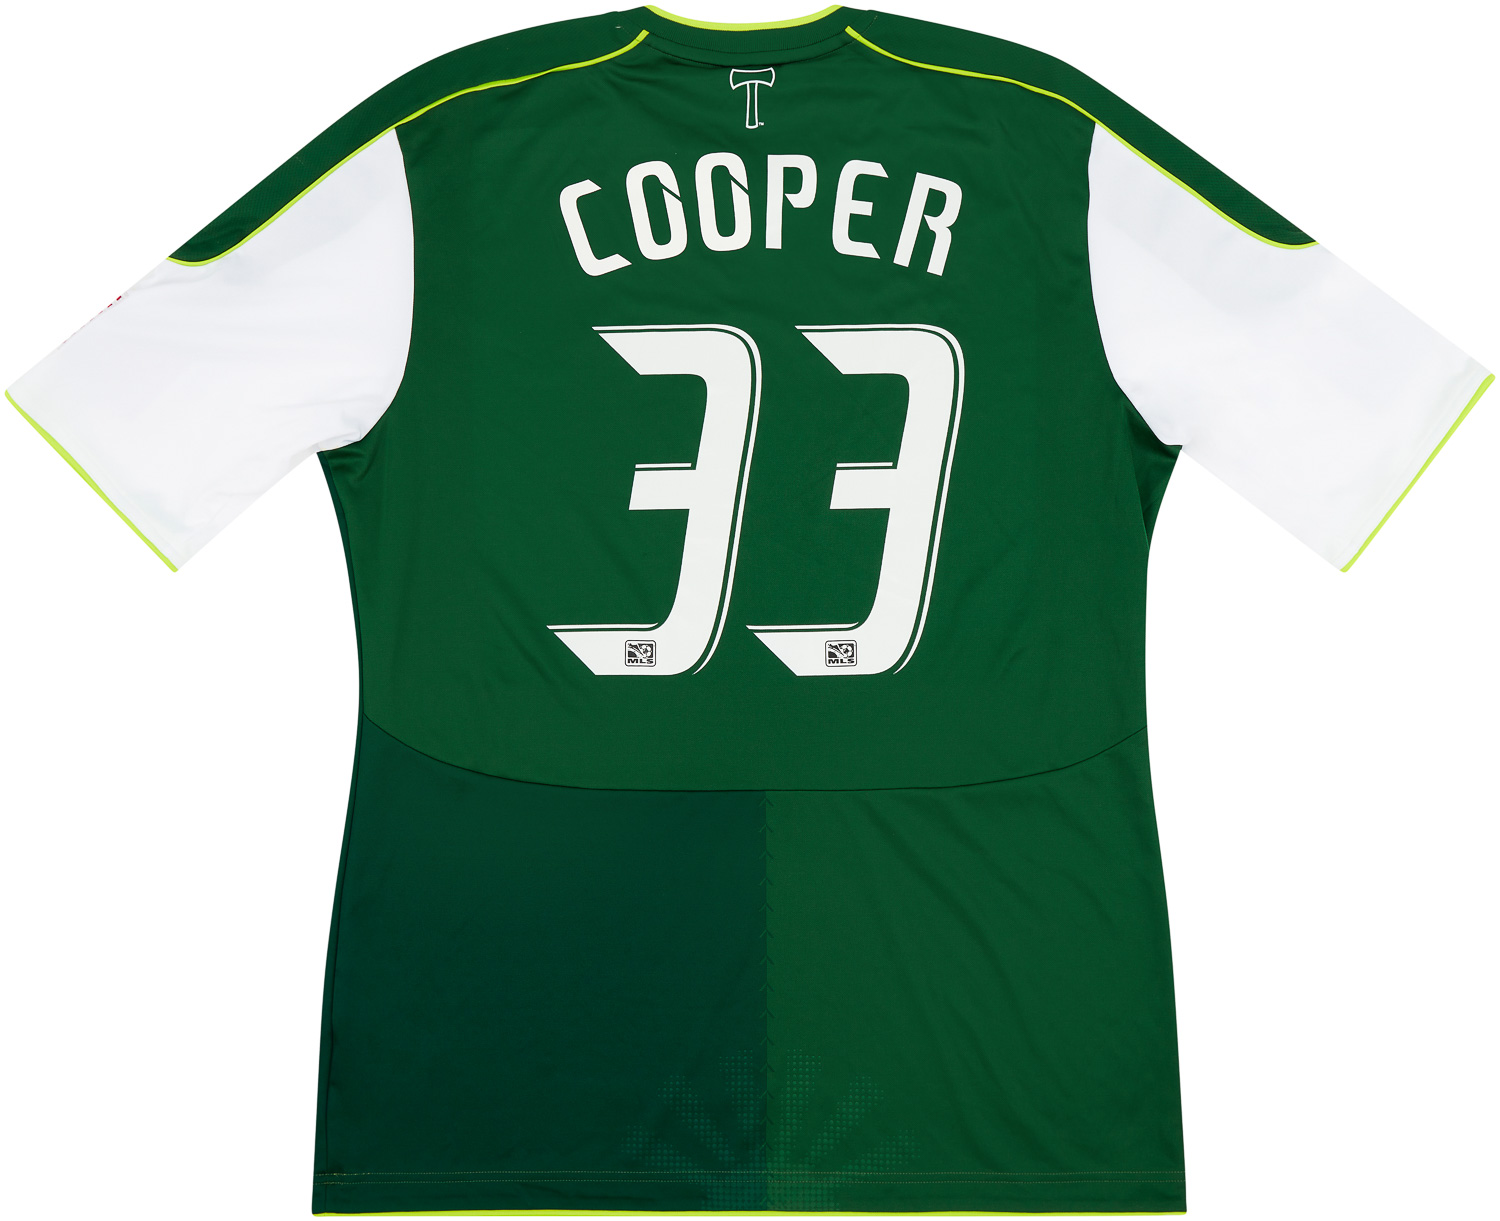 2011 Portland Timbers Match Issue Home Shirt Cooper #33